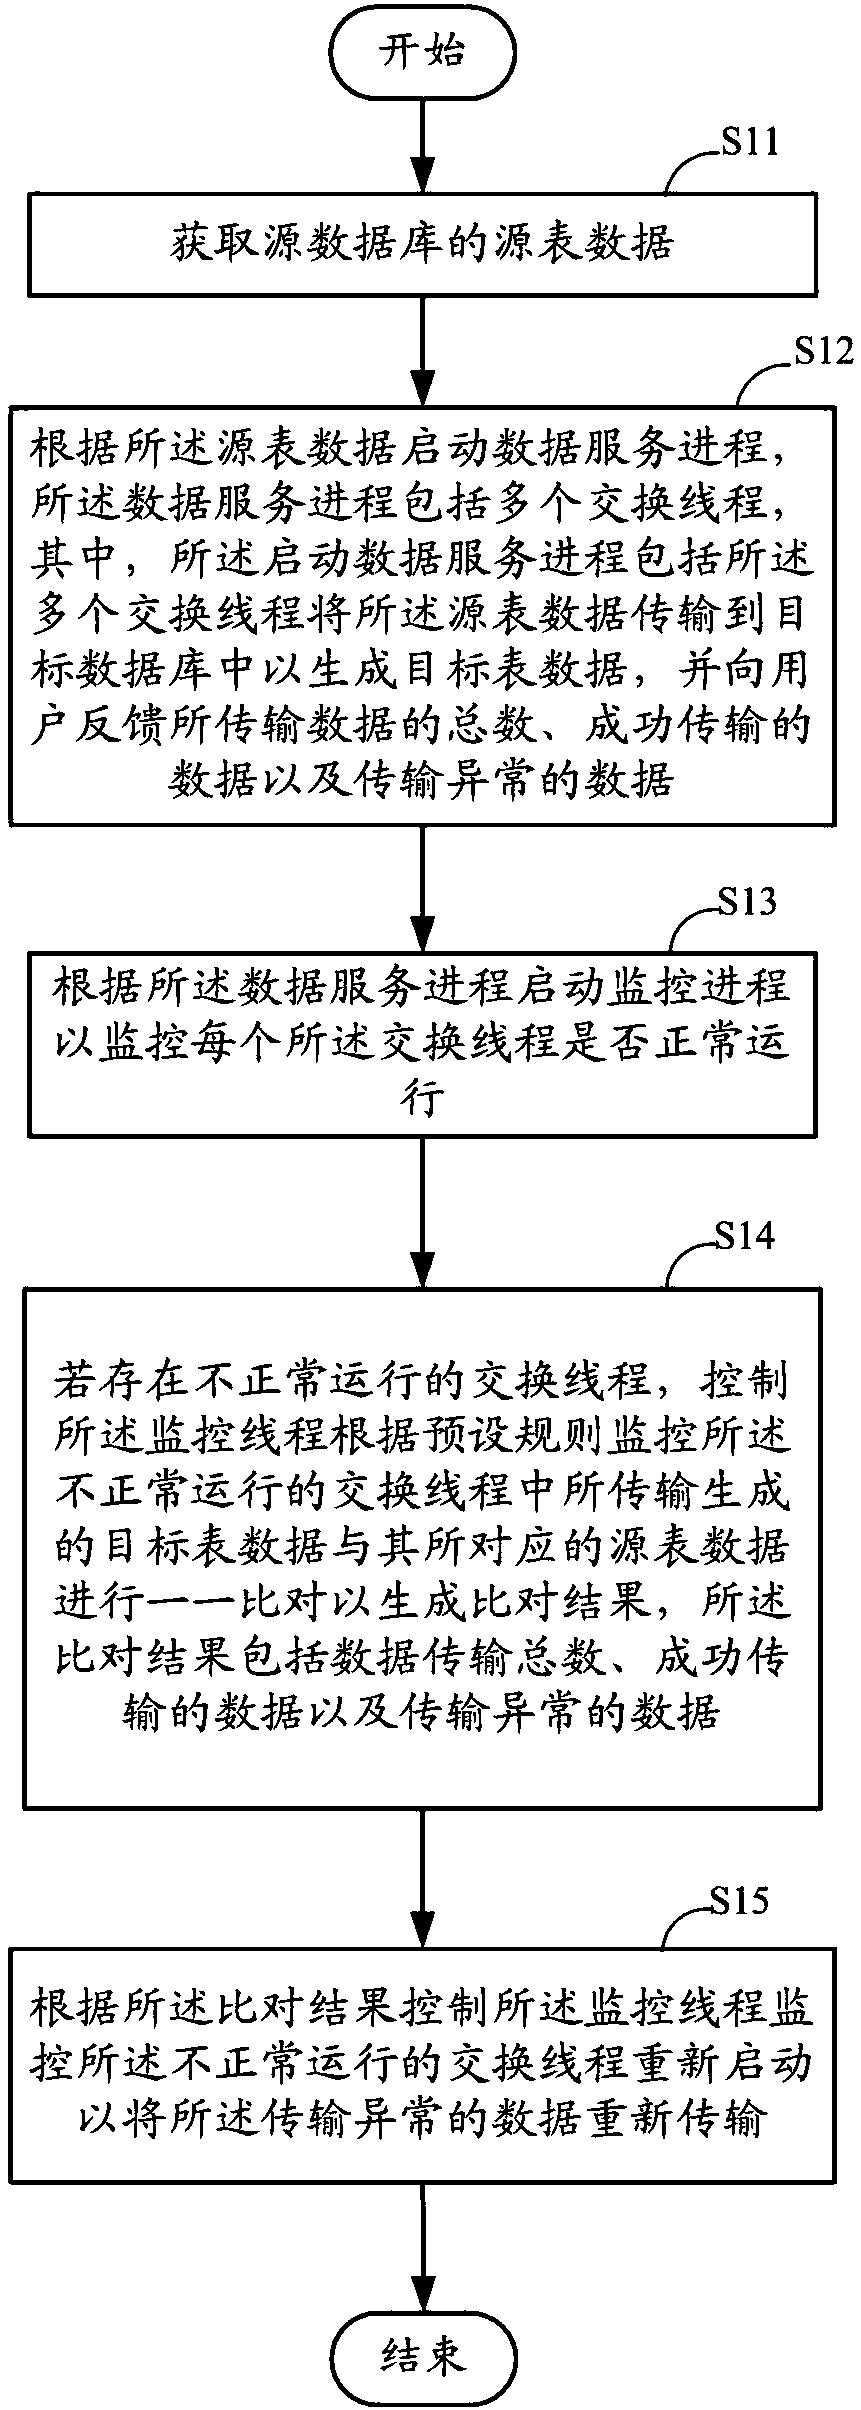 Data exchange monitoring method and device for achieving double-reconciliation mechanism inside and outside threads